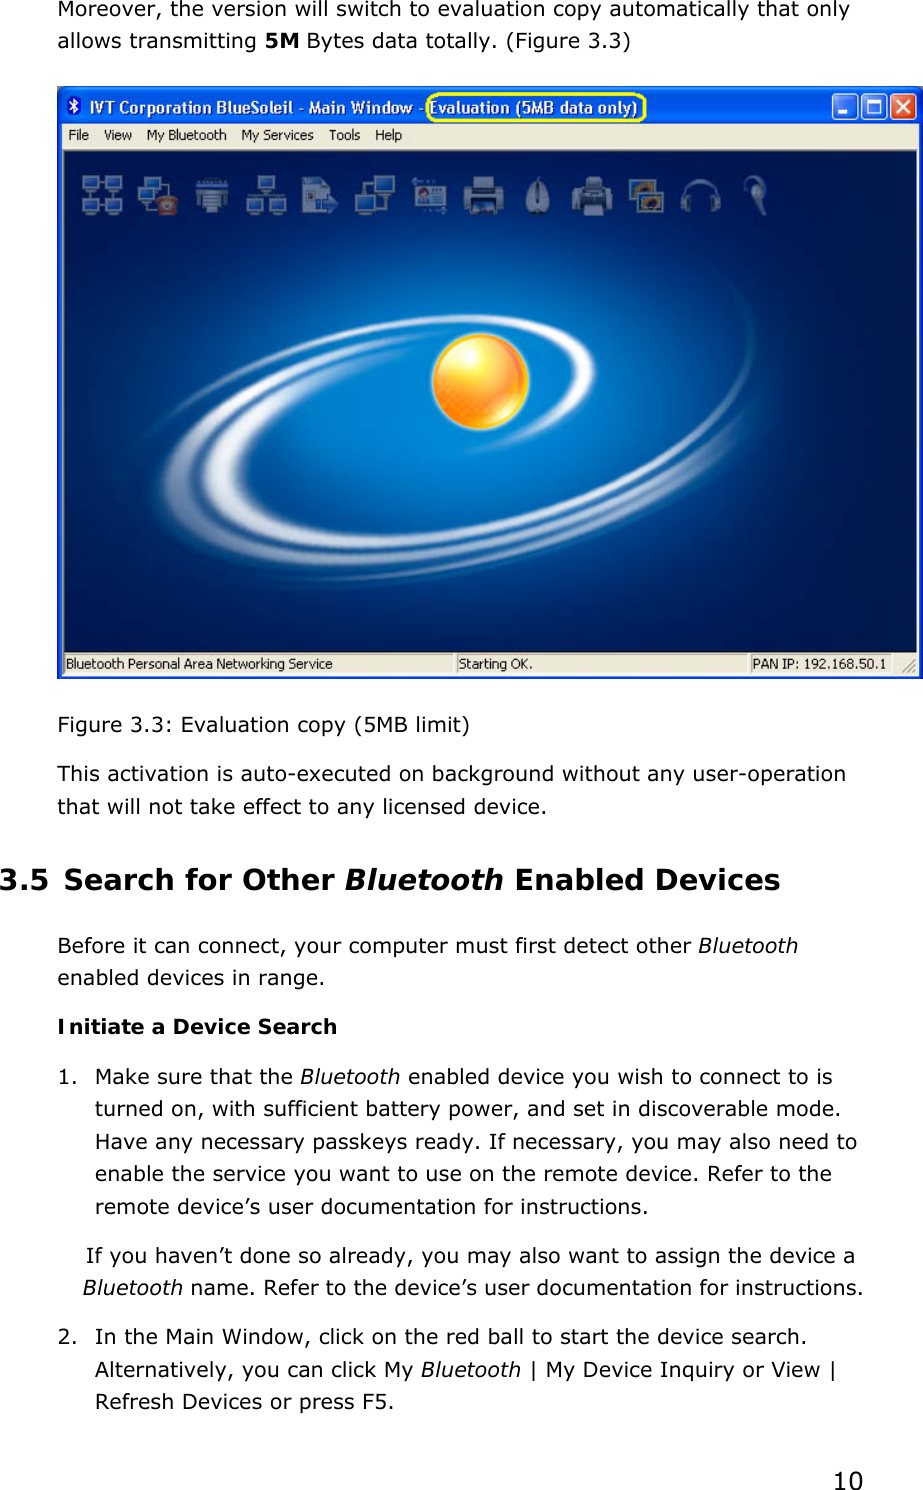  10 Moreover, the version will switch to evaluation copy automatically that only allows transmitting 5M Bytes data totally. (Figure 3.3)  Figure 3.3: Evaluation copy (5MB limit) This activation is auto-executed on background without any user-operation that will not take effect to any licensed device. 3.5 Search for Other Bluetooth Enabled Devices Before it can connect, your computer must first detect other Bluetooth enabled devices in range. Initiate a Device Search 1. Make sure that the Bluetooth enabled device you wish to connect to is turned on, with sufficient battery power, and set in discoverable mode. Have any necessary passkeys ready. If necessary, you may also need to enable the service you want to use on the remote device. Refer to the remote device’s user documentation for instructions. If you haven’t done so already, you may also want to assign the device a Bluetooth name. Refer to the device’s user documentation for instructions. 2. In the Main Window, click on the red ball to start the device search. Alternatively, you can click My Bluetooth | My Device Inquiry or View | Refresh Devices or press F5. 